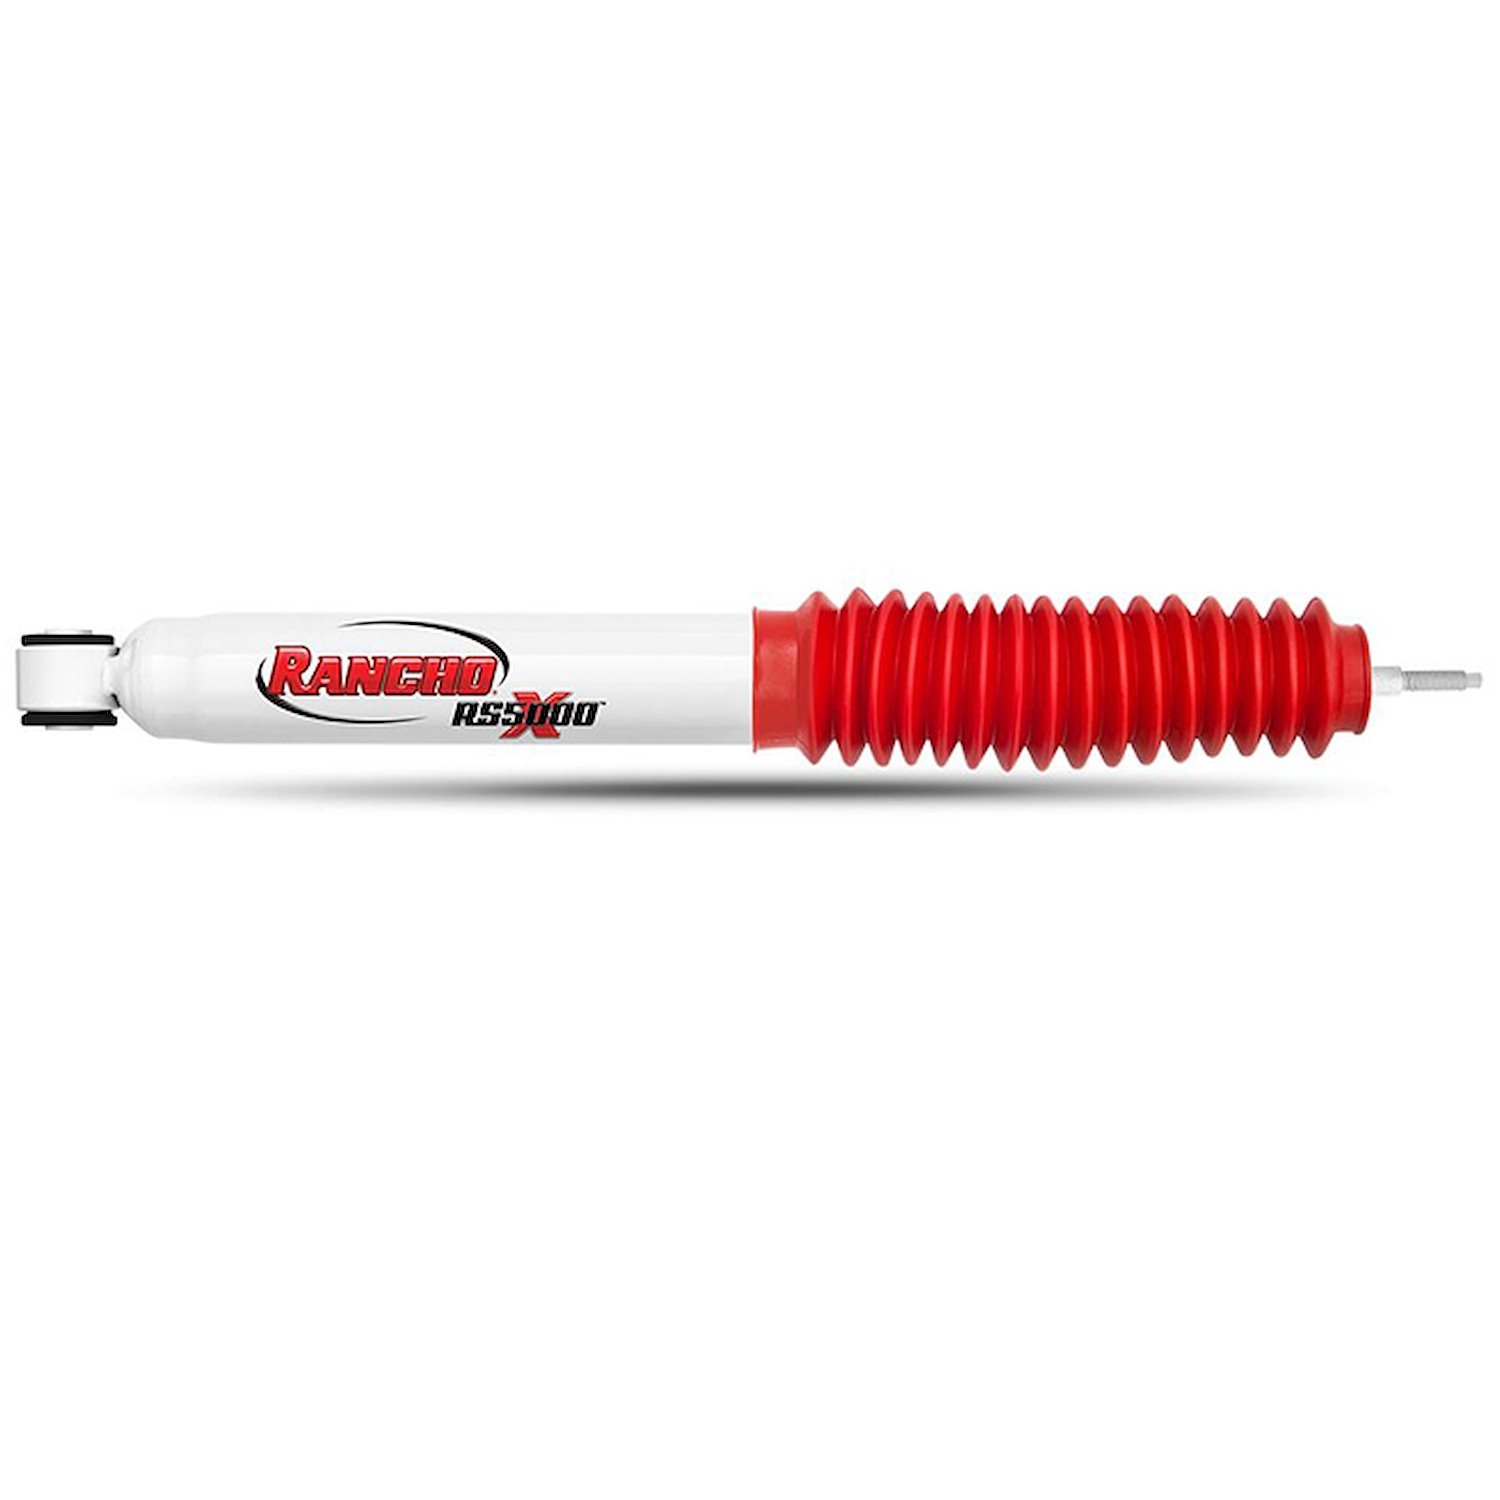 RS5000X Shock Absorber for 2007-2018 Toyota Tundra